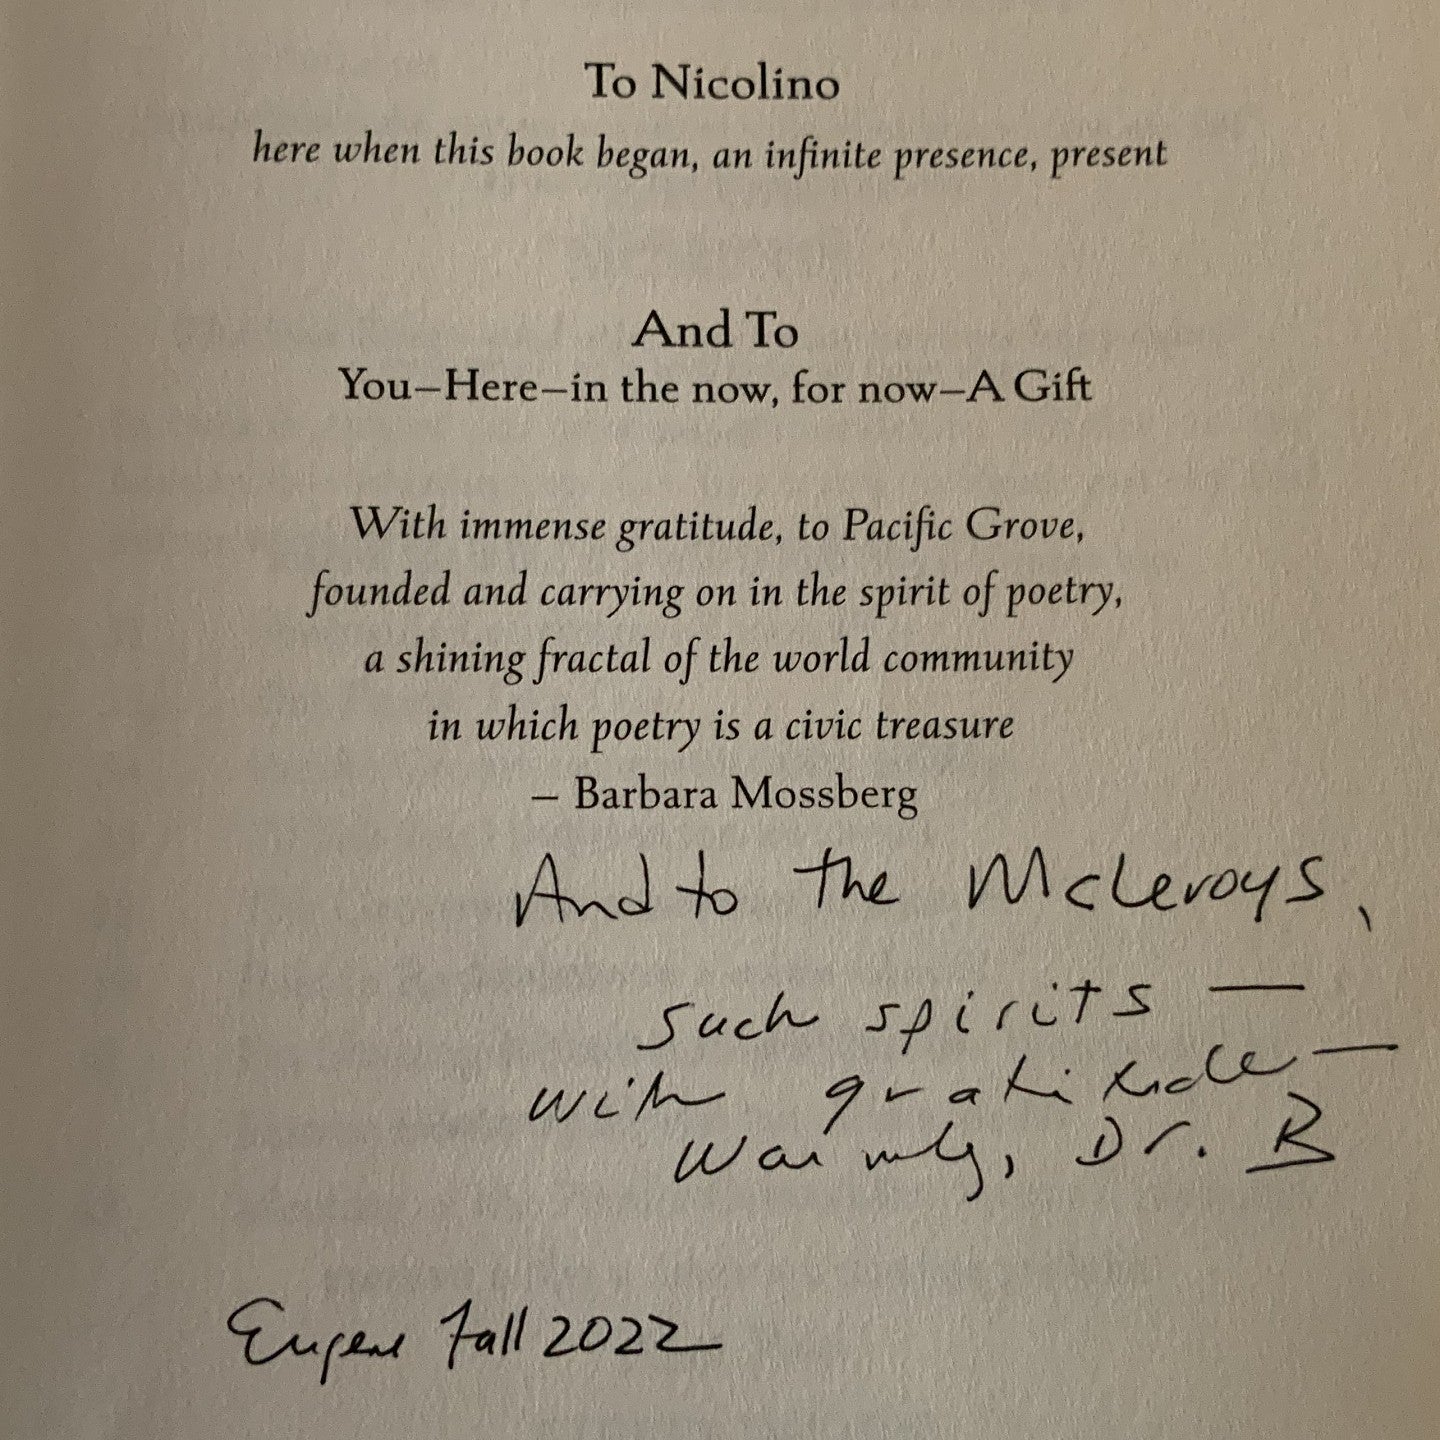 photo of a book dedication page with a handwritten inscription reading "and to the McLeroys-Such spirits-with gratitude, warmly, Dr. B."